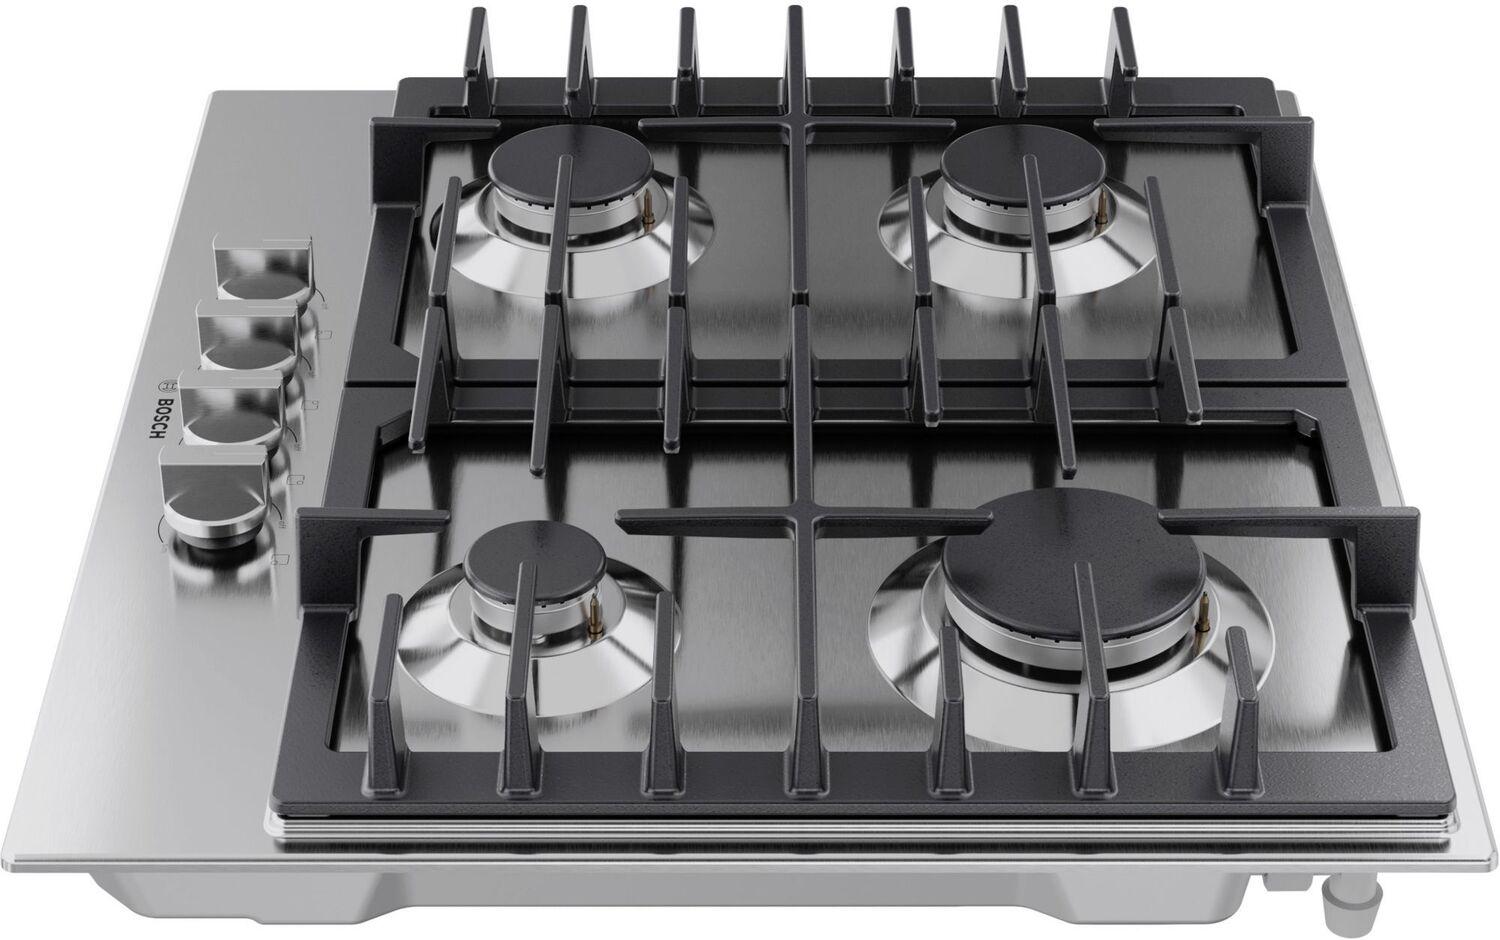 Bosch 300 Series Gas Cooktop 24" Stainless steel NGM3450UC